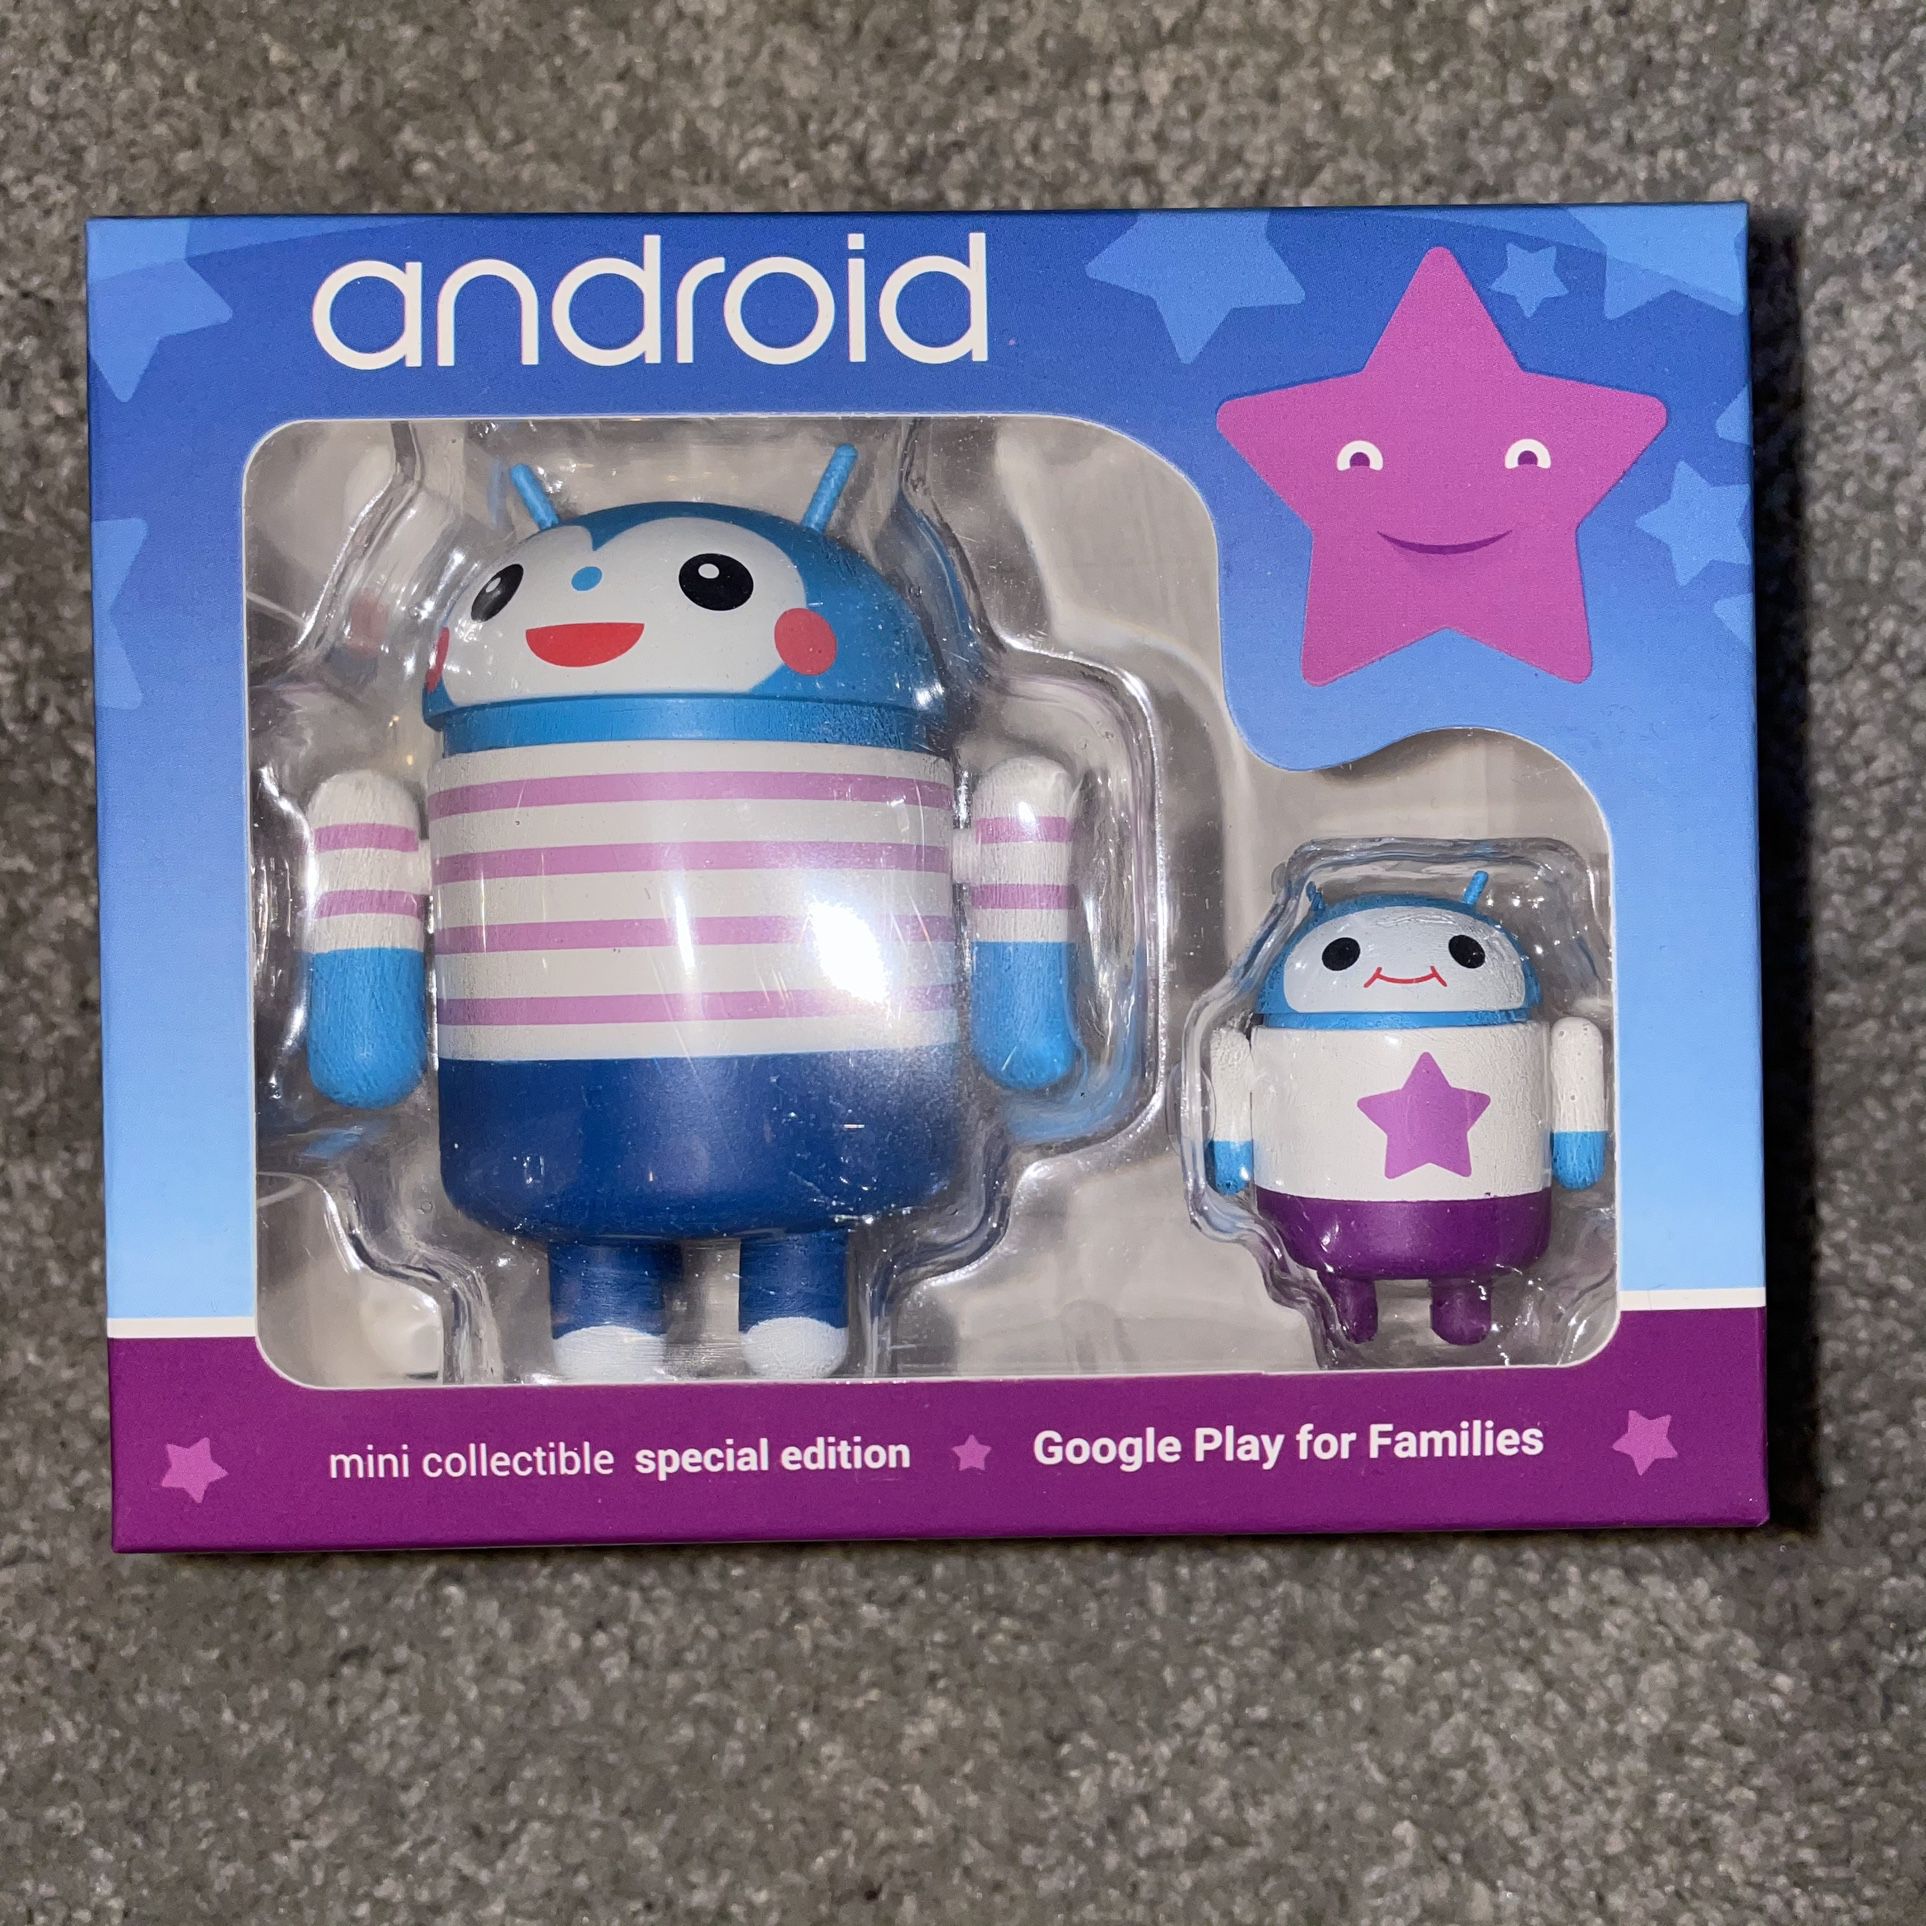 Android Collectible Figurine